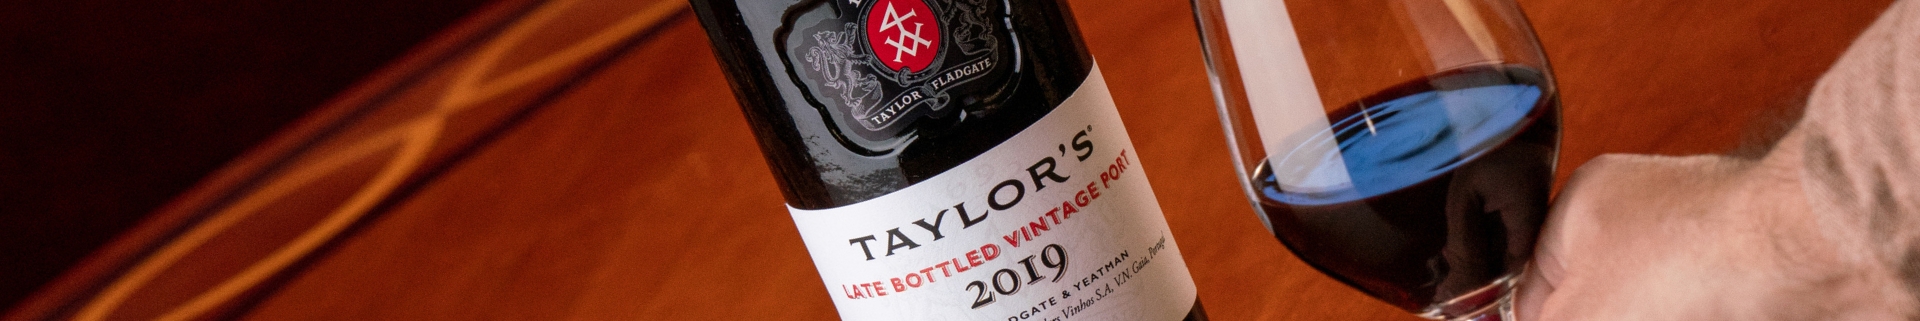 Late Bottled Vintage, or LBV, is the most popular premium Port style in both England and Canada, representing one in five purchases of Port in the...